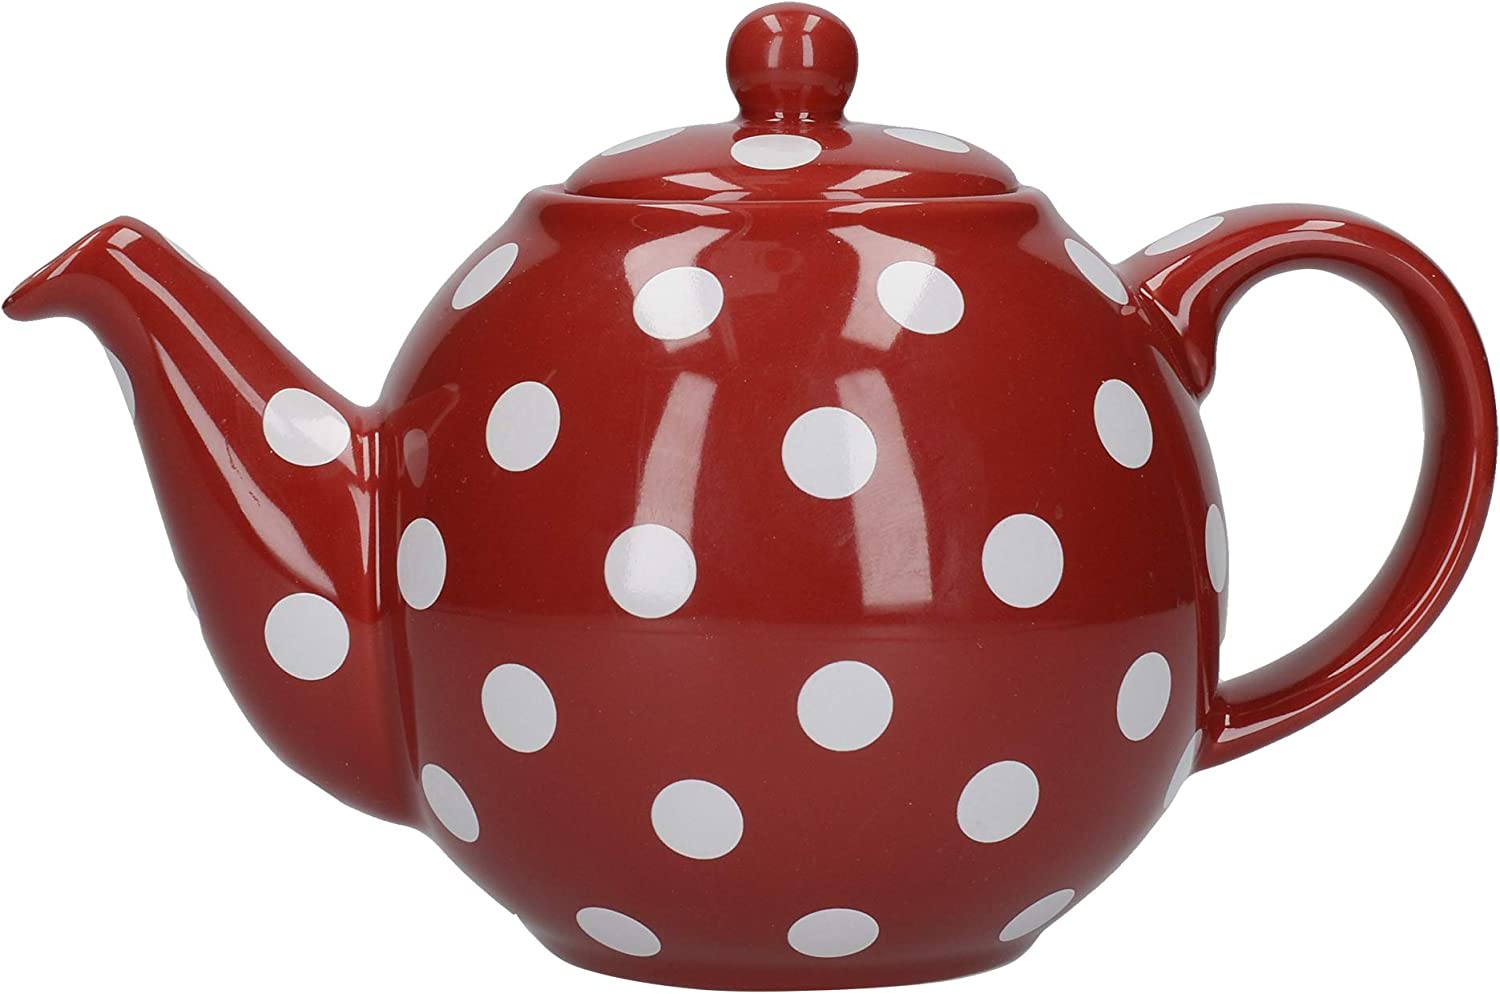 London Pottery 2 Cup Globe Teapot, Red with White Spots